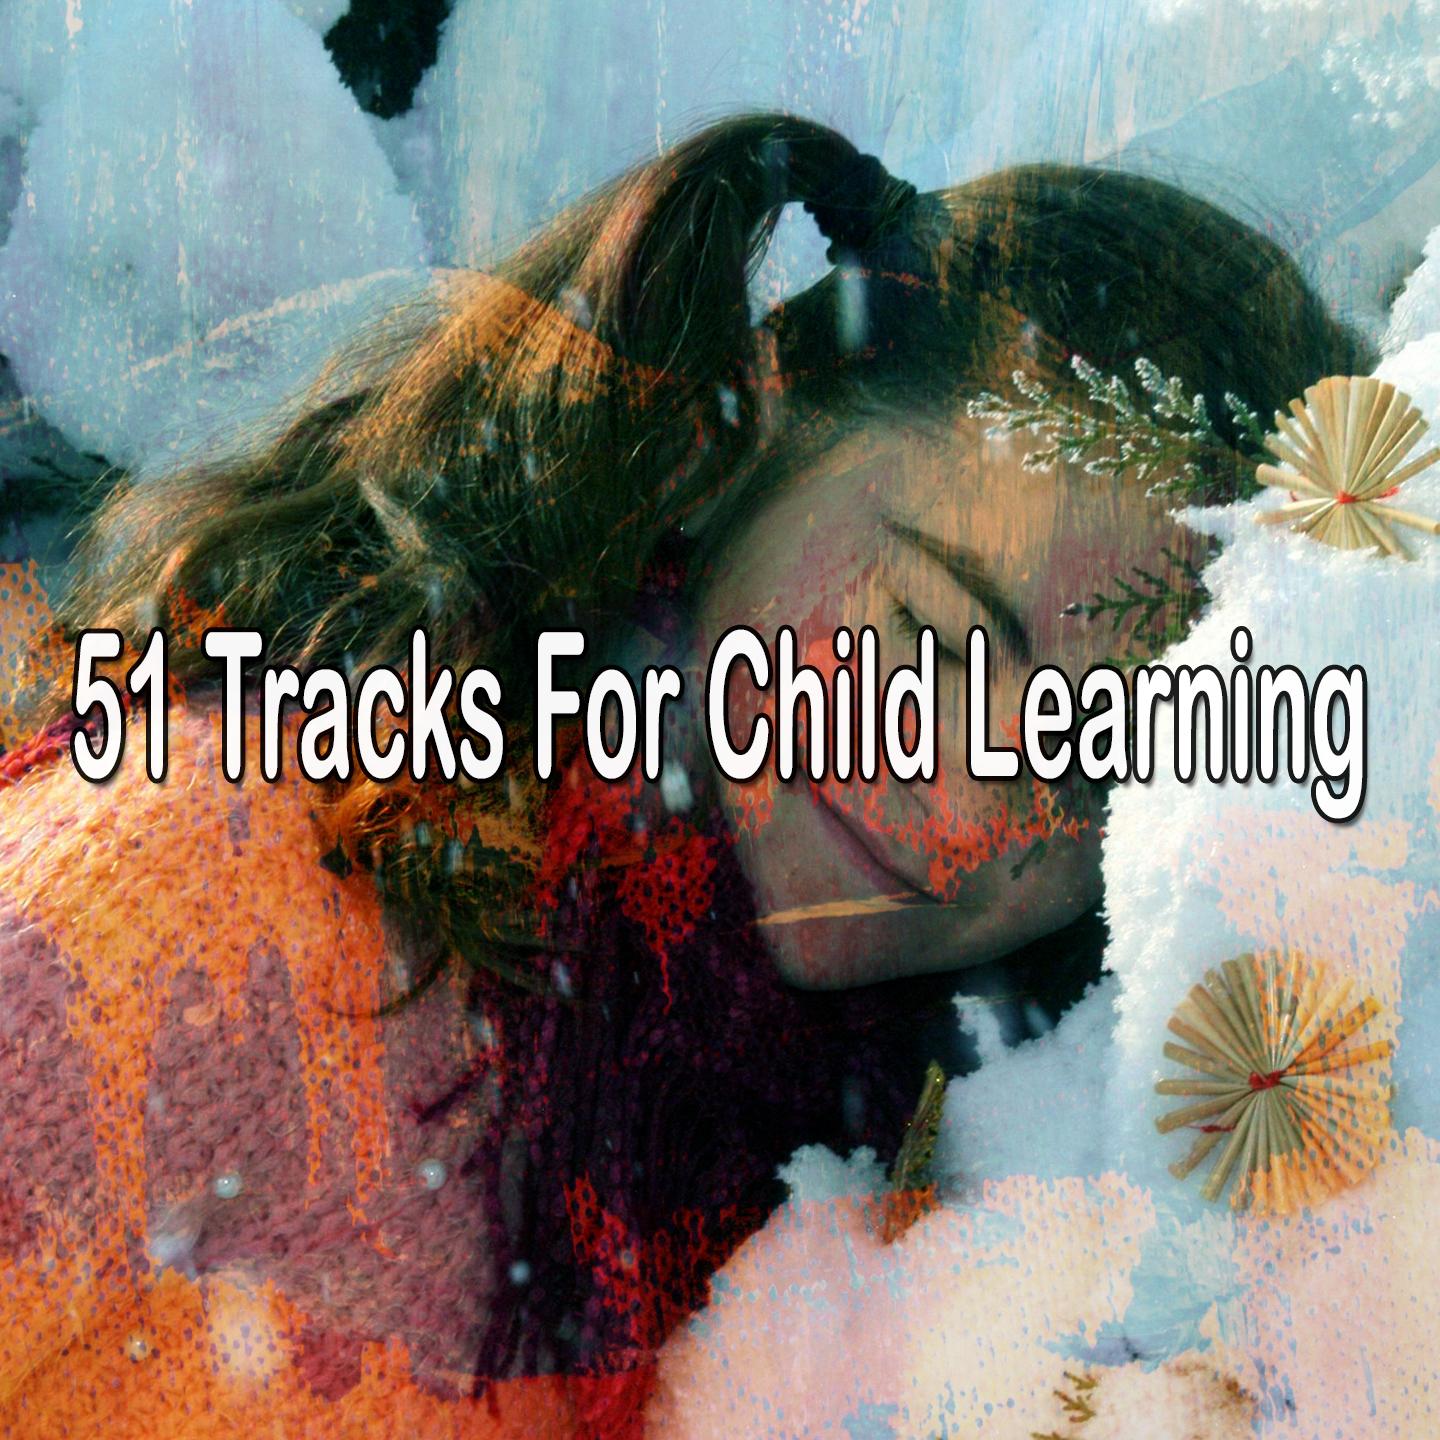 51 Tracks for Child Learning